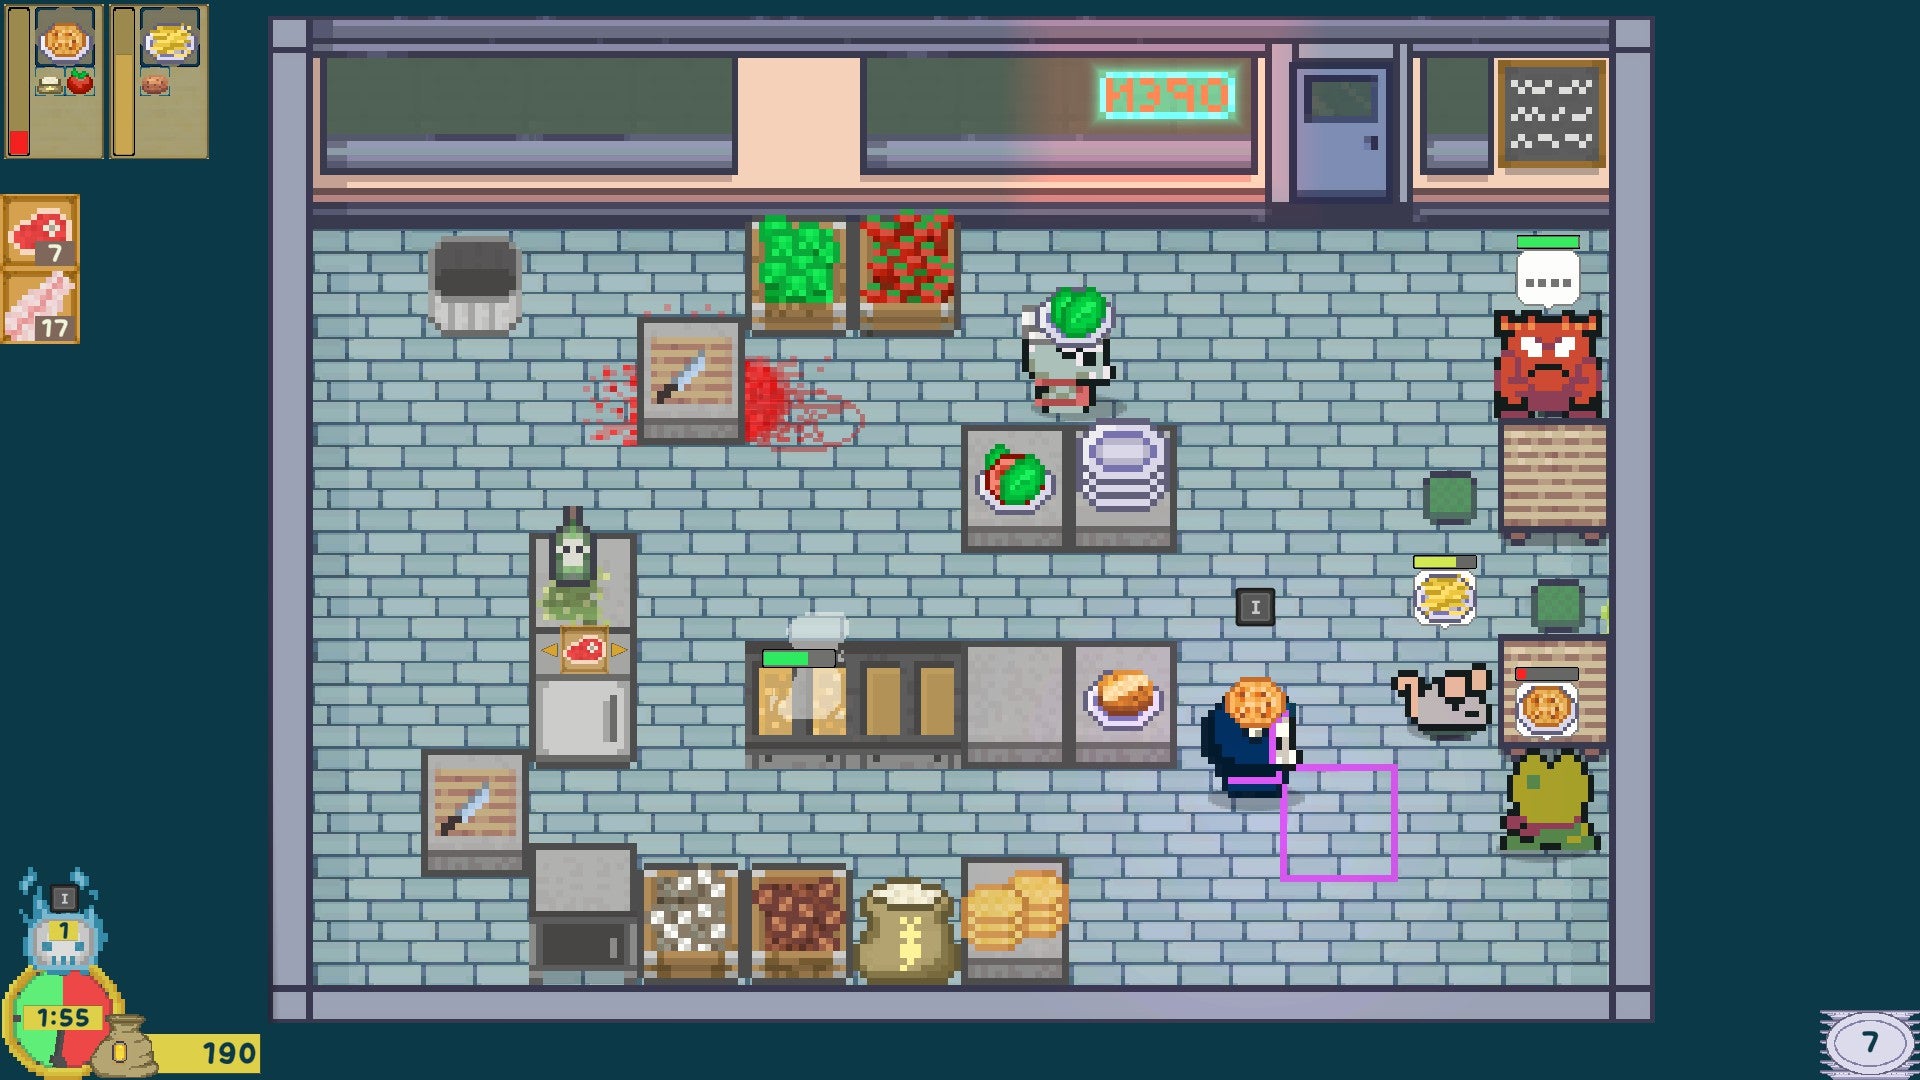 Image for Bone's Cafe is even more fun than killing customers usually is